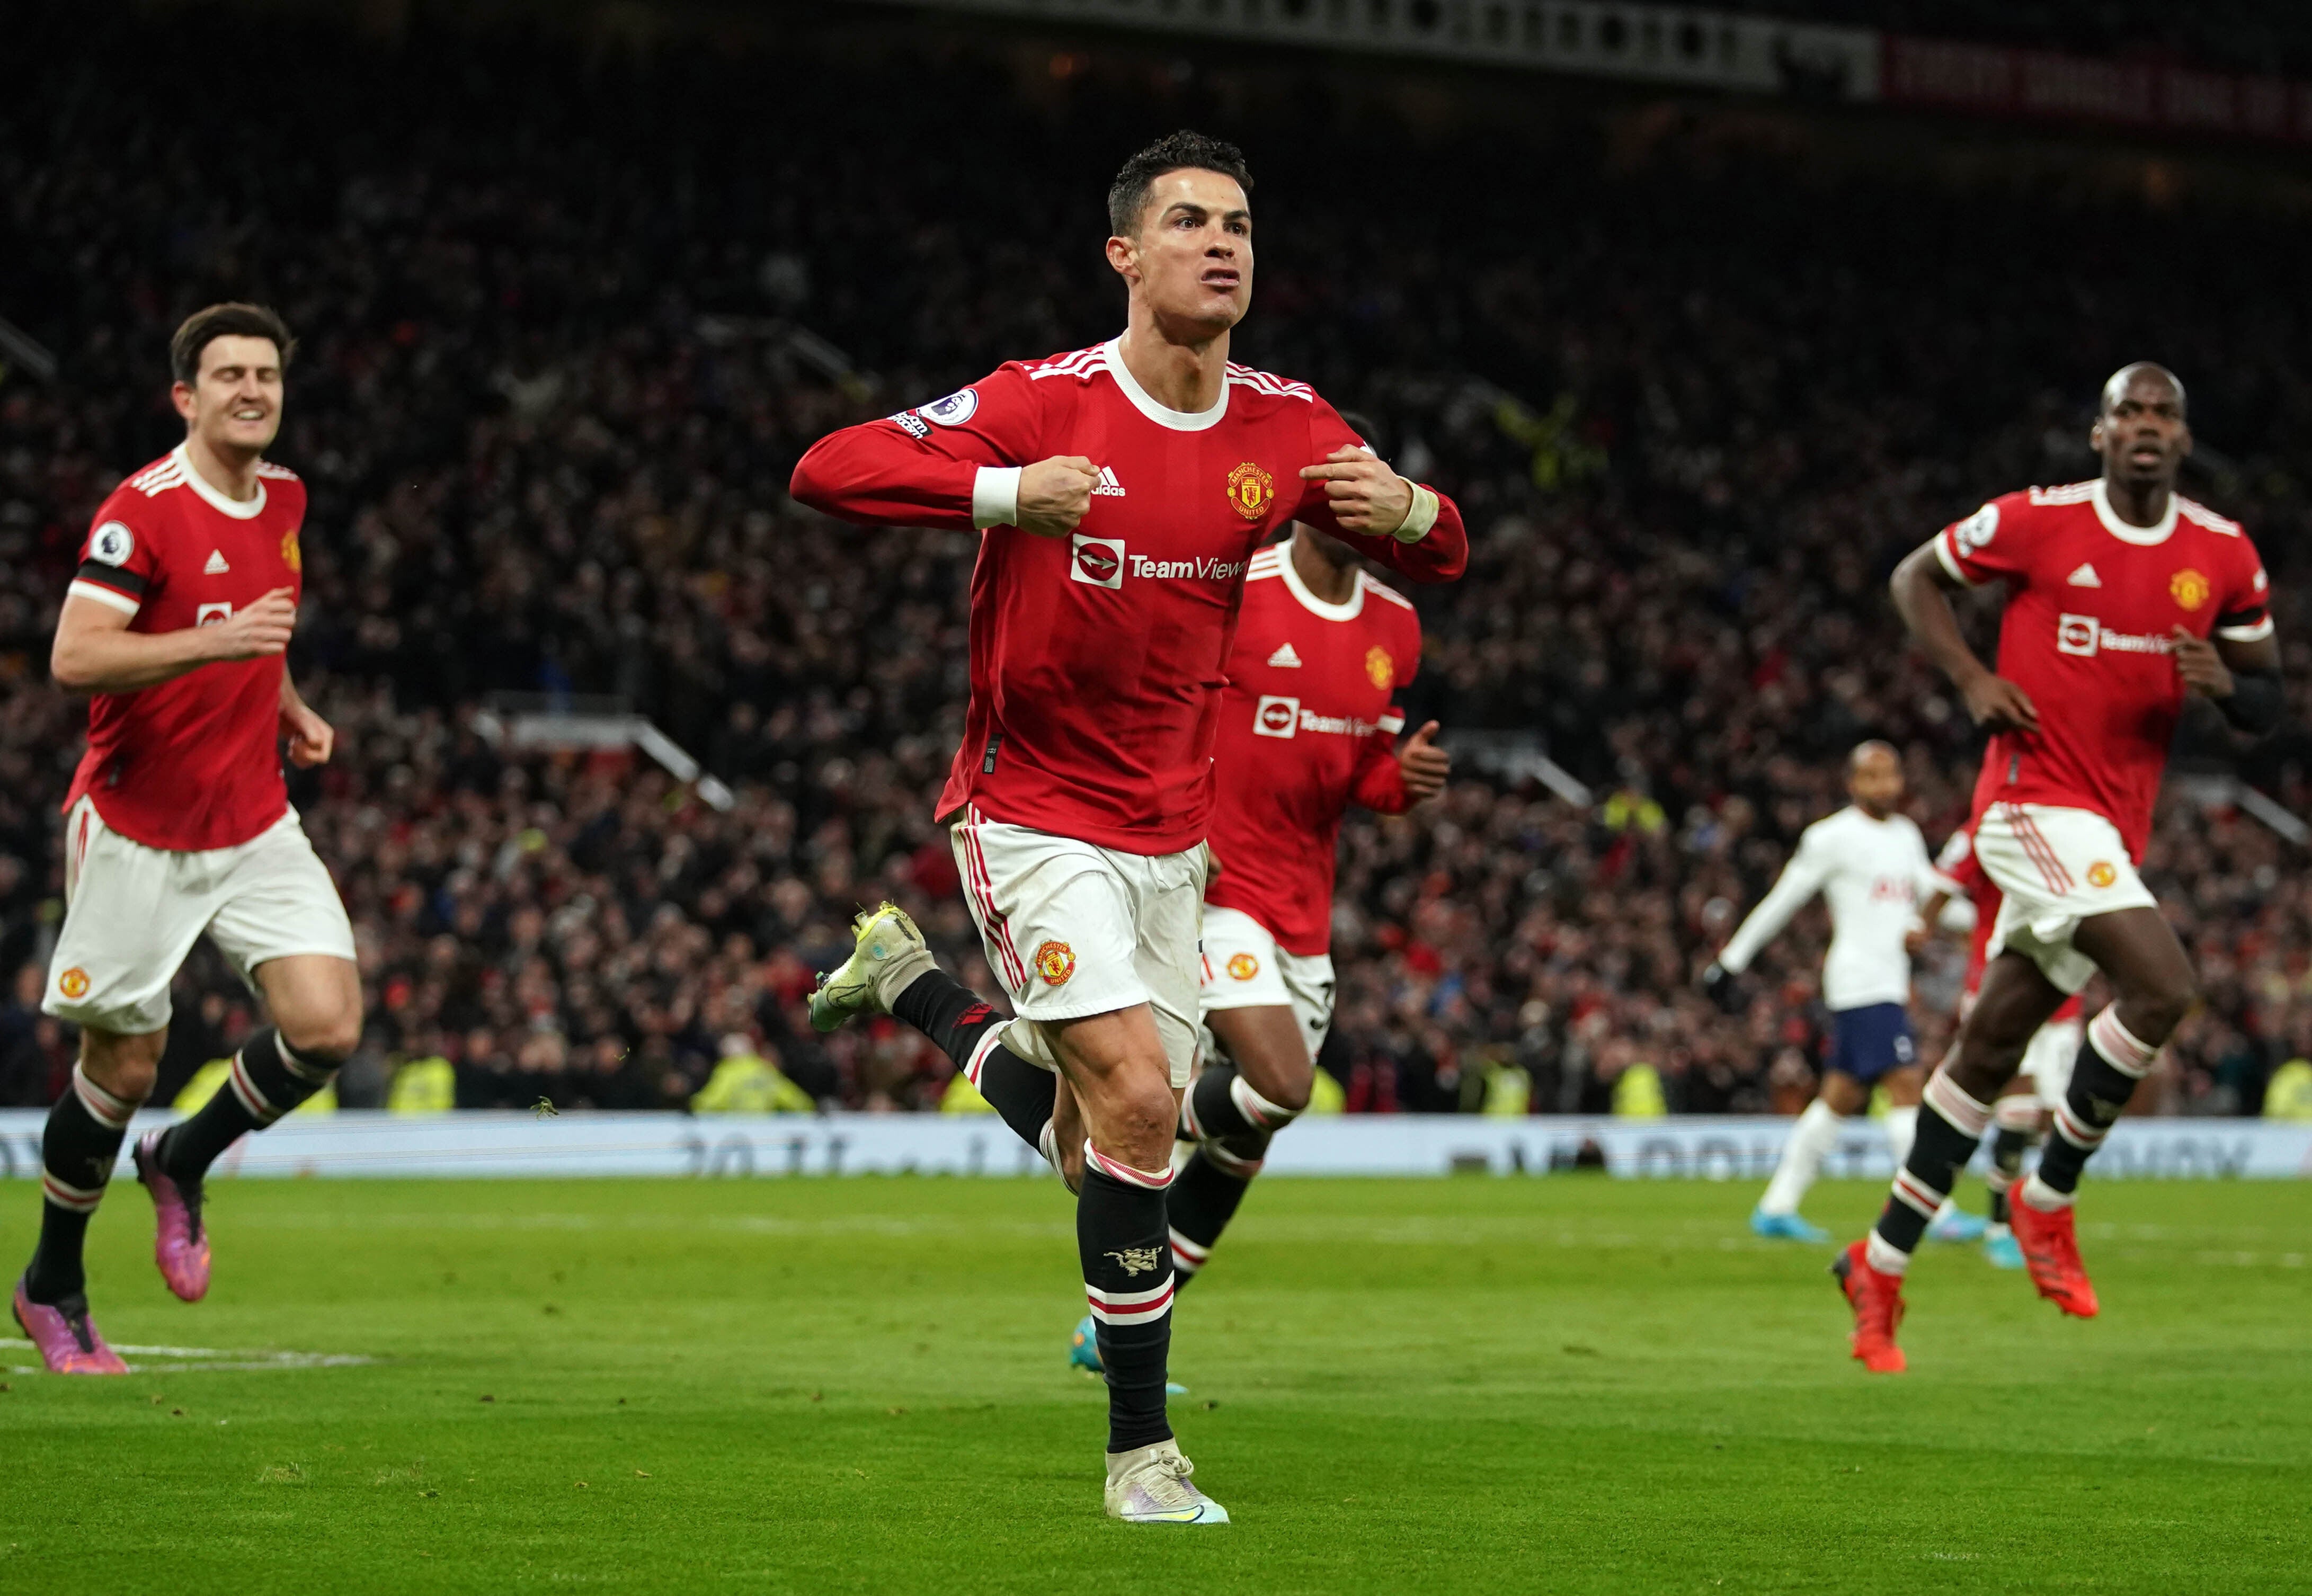 After a week of speculation about his future at Manchester United, Cristiano Ronaldo responded in characteristic fashion by scoring a hat-trick against Tottenham (Martin Rickett/PA)